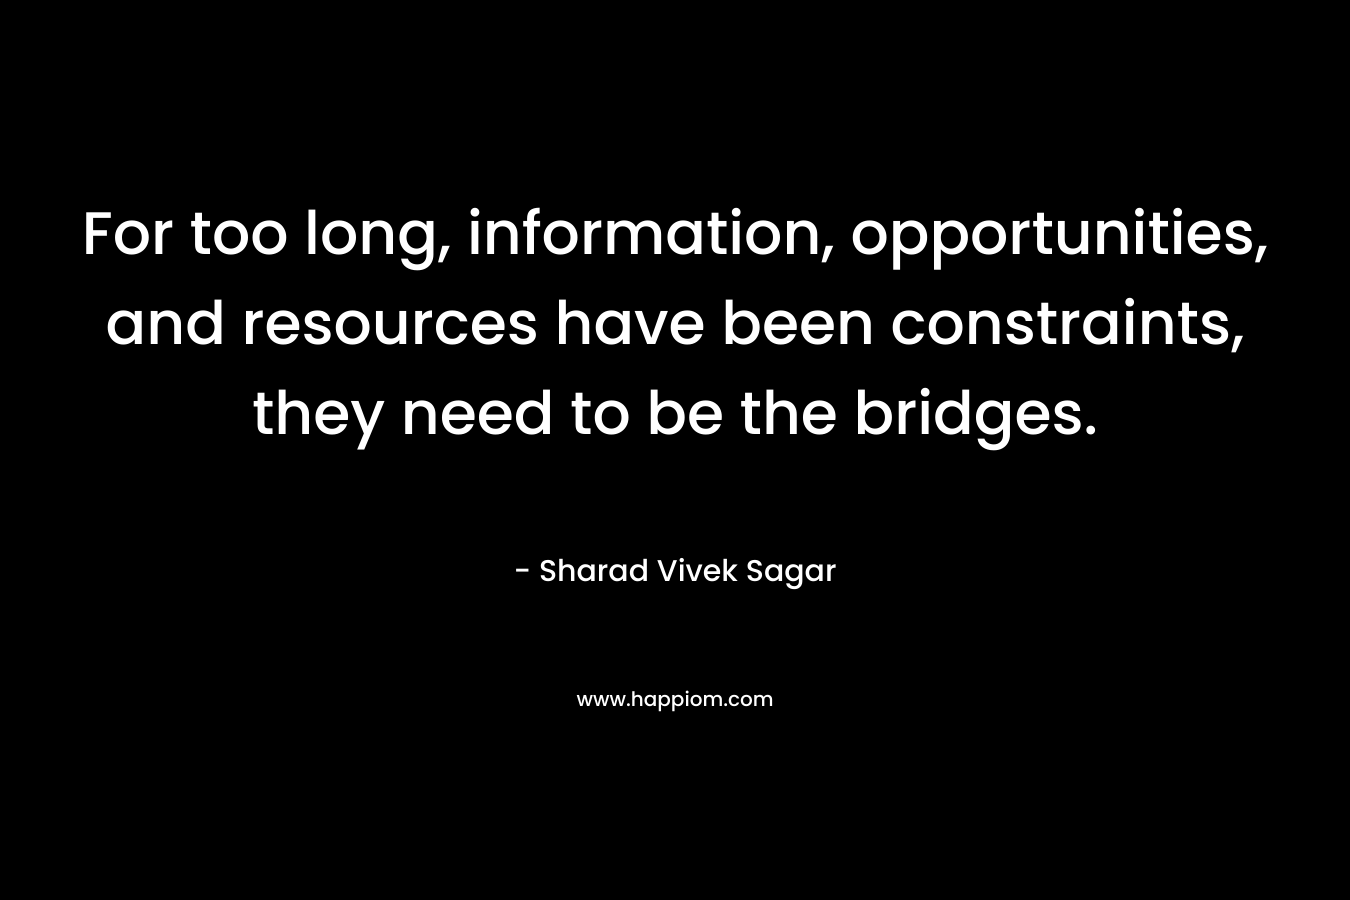 For too long, information, opportunities, and resources have been constraints, they need to be the bridges.